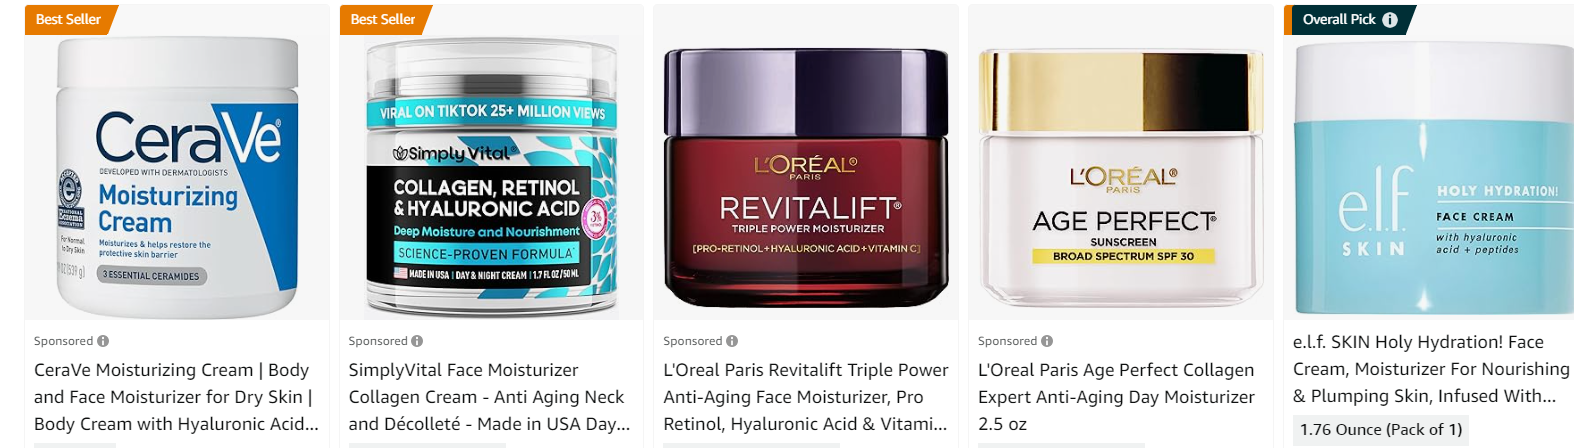 CeraVe, L'Oreal, and other moisturizing cream makeup products